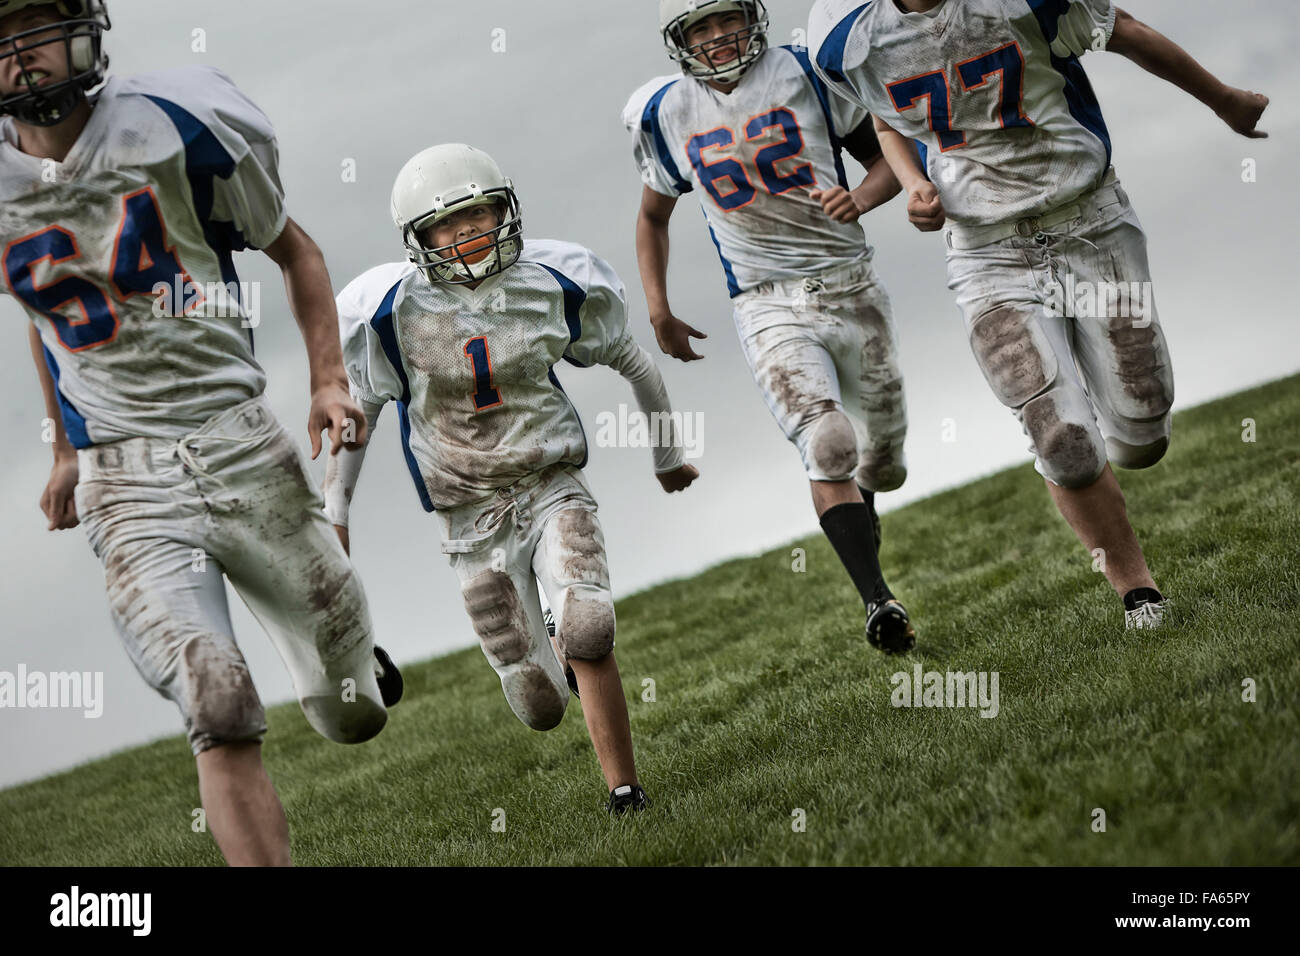 A group of four football players, young people in sports uniform and protective helmets running forward. Stock Photo